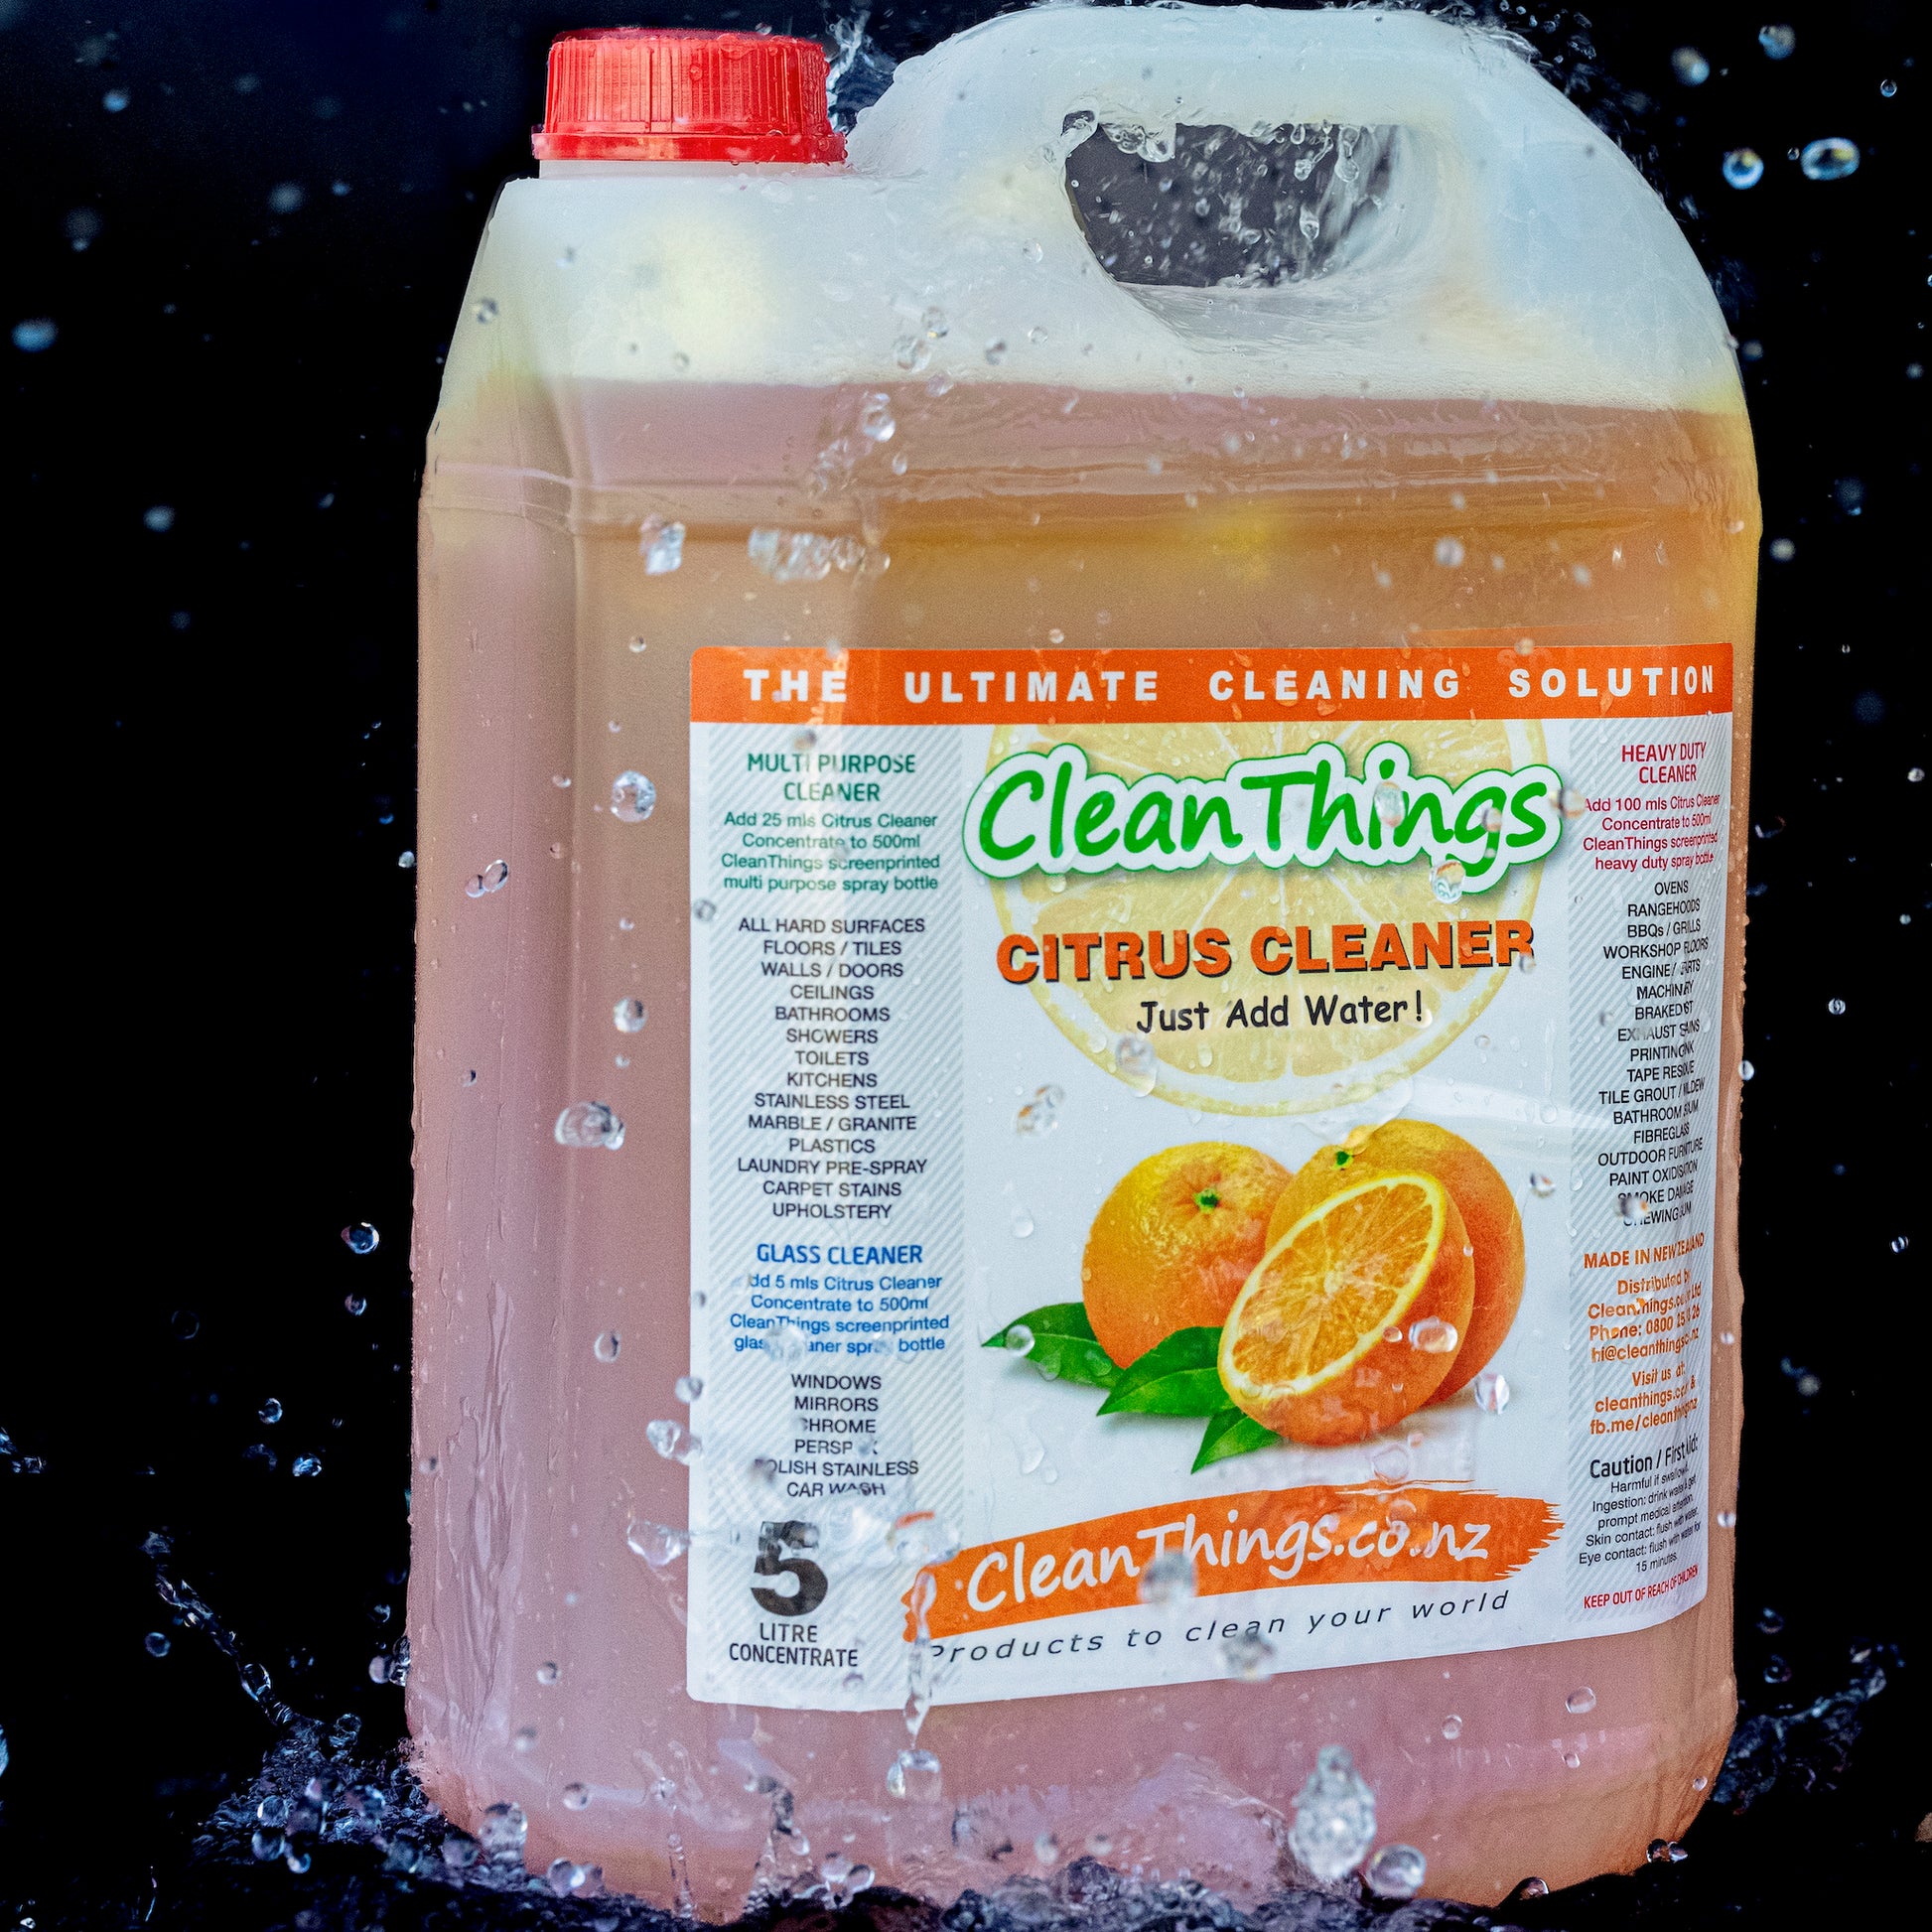 Citrus Cleaner Concentrate 5 litres just add water & clean almost anything cost-effective make 100 litres all purpose cleaner